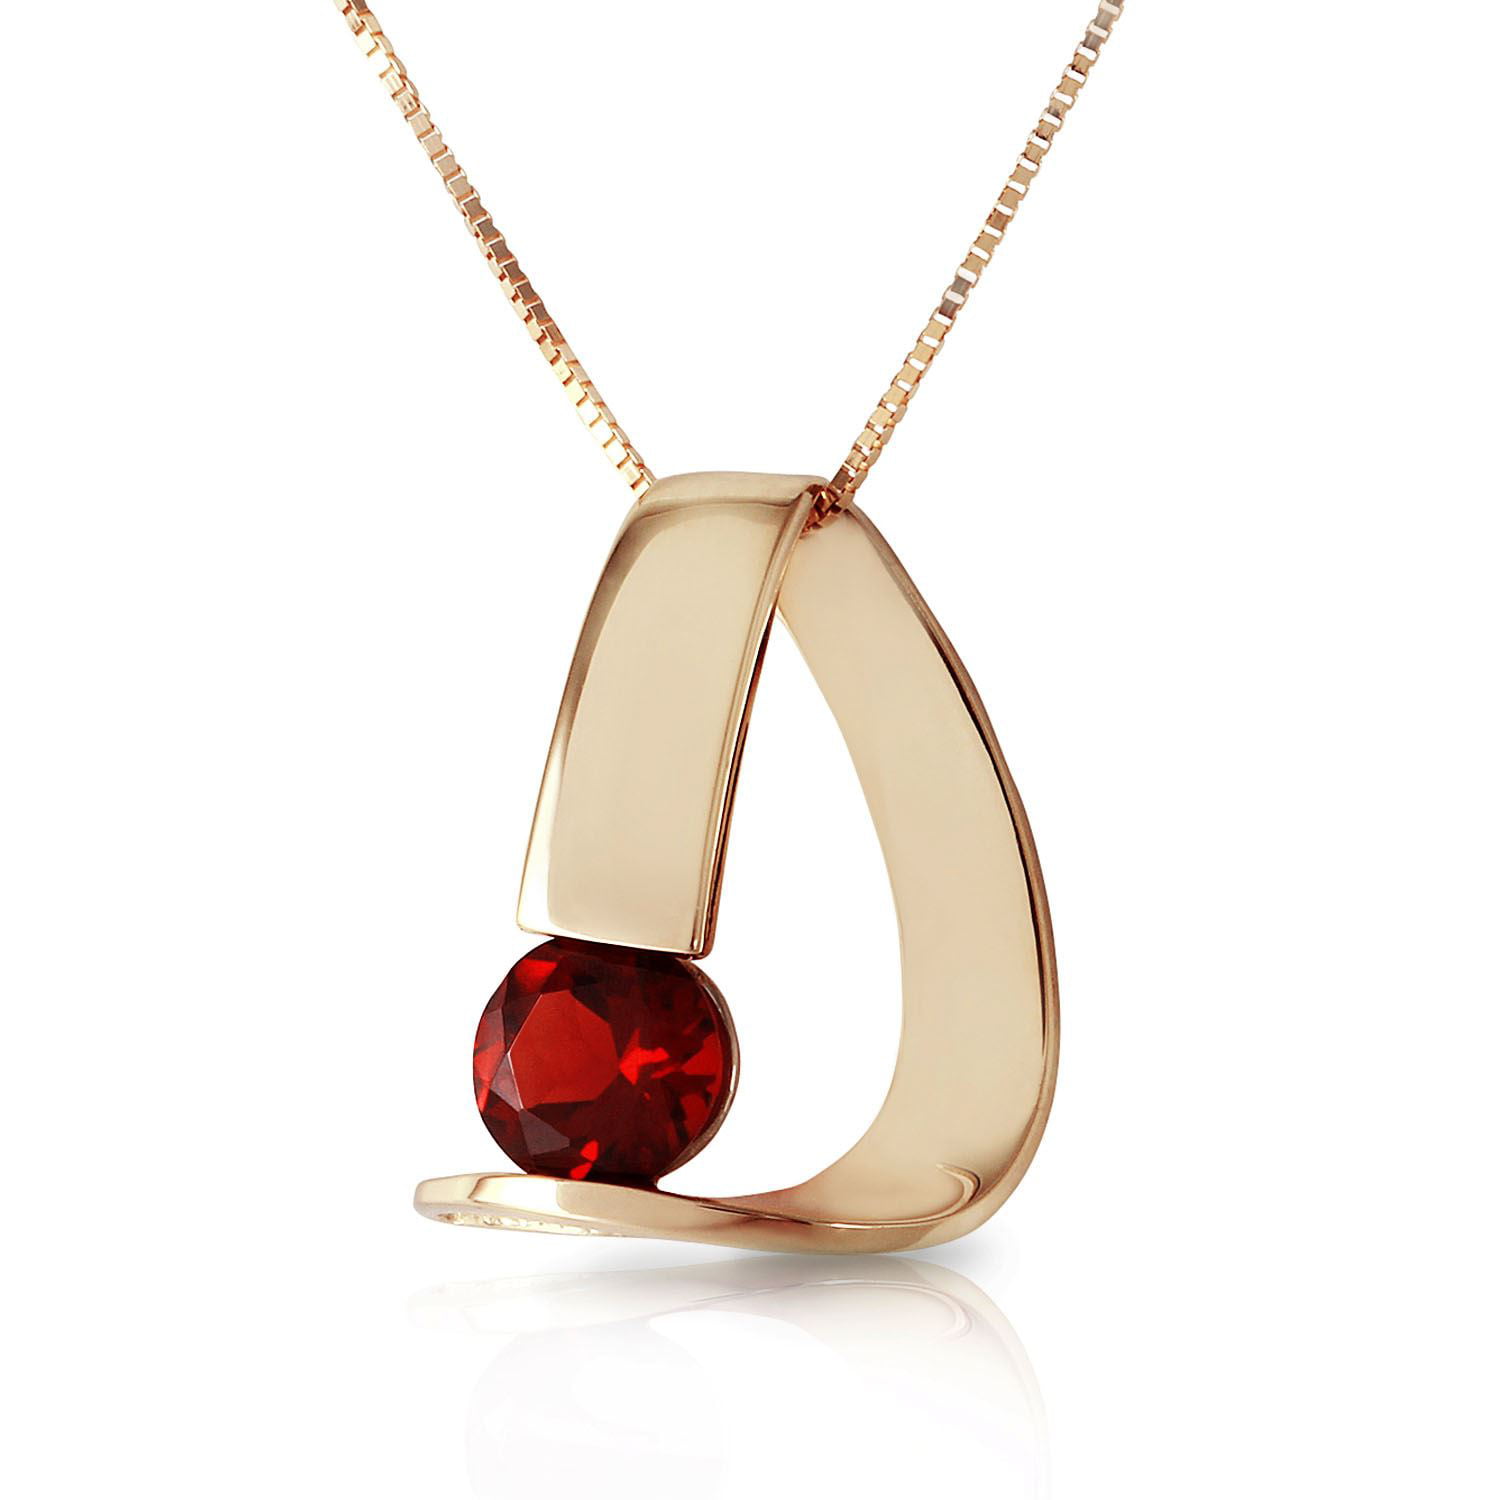 ALARRI 0.25 Carat 14K Solid Gold Thunder Garnet Necklace with 18 Inch Chain Length